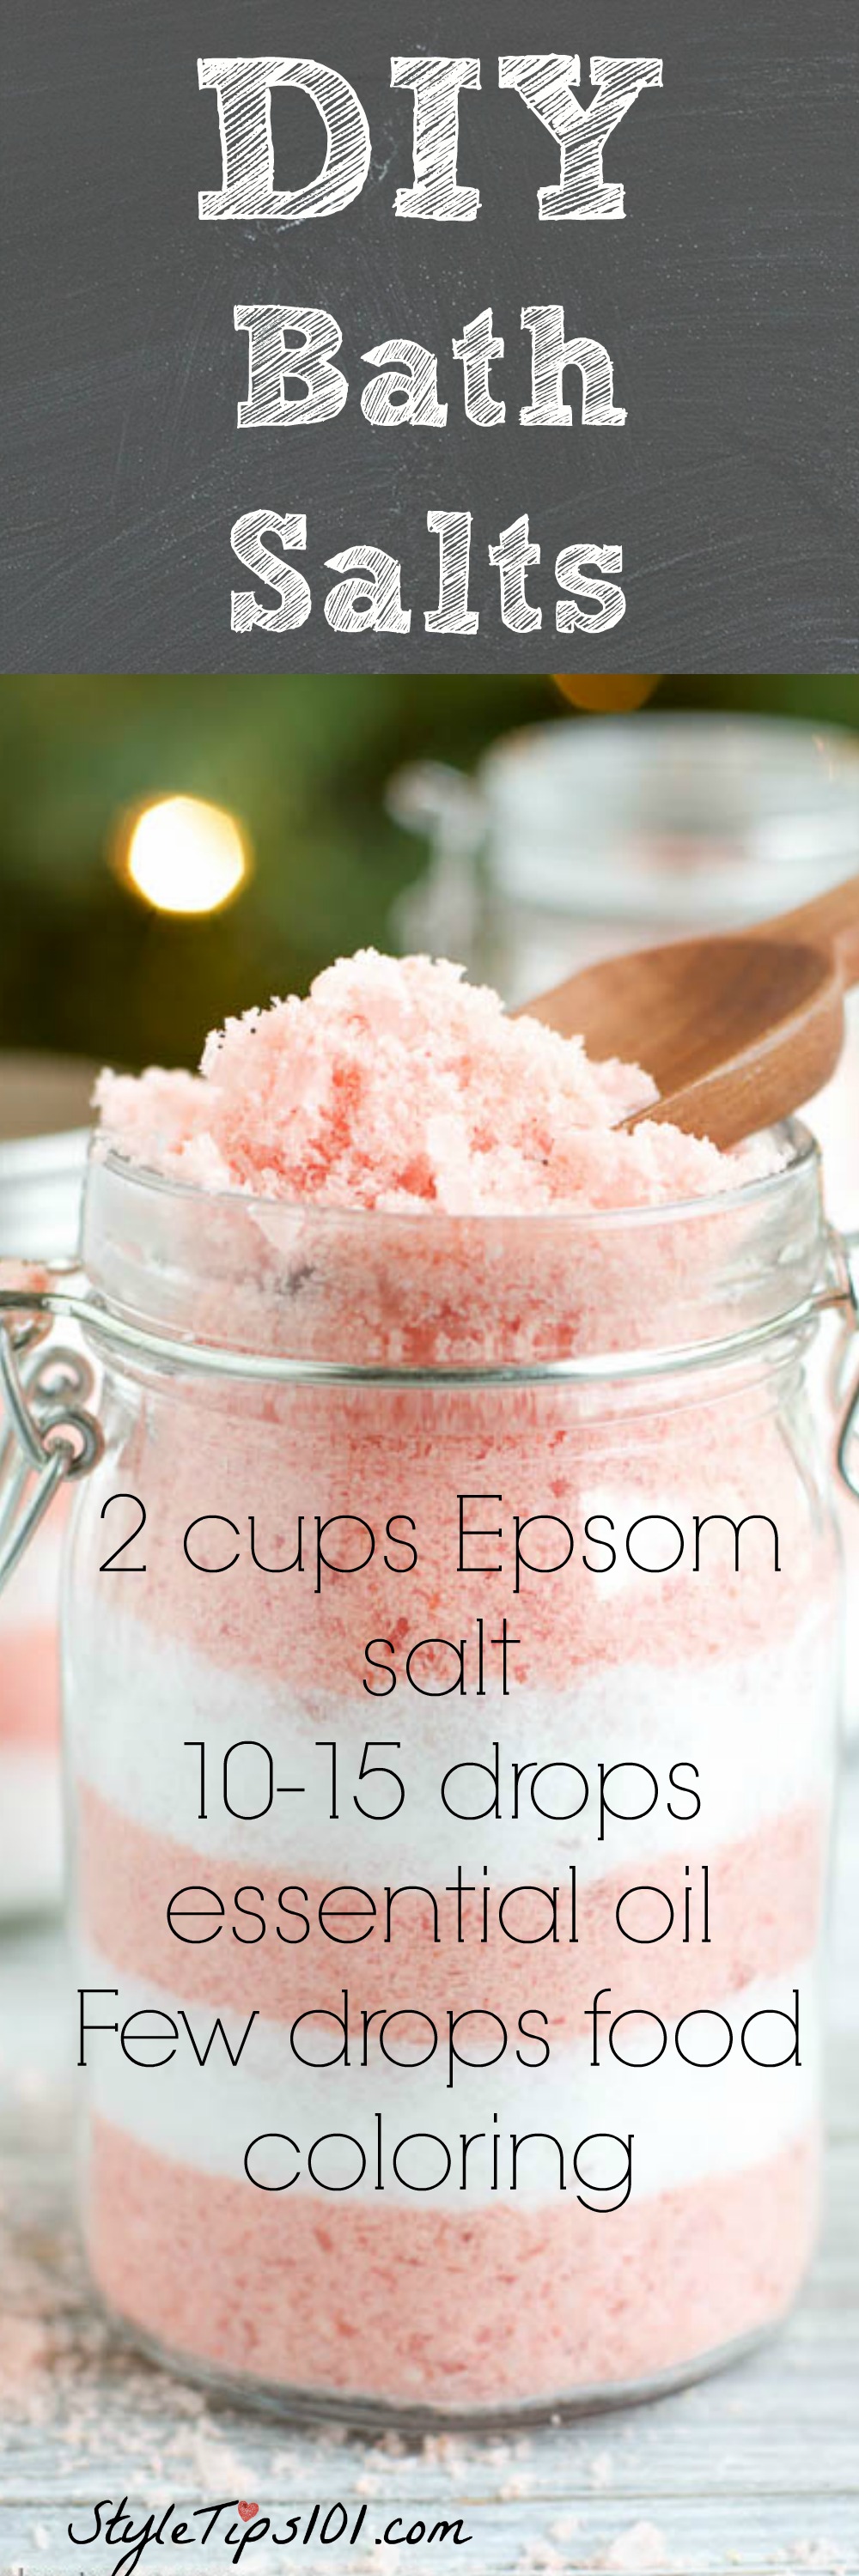 How to Make Your Own Bath Salts